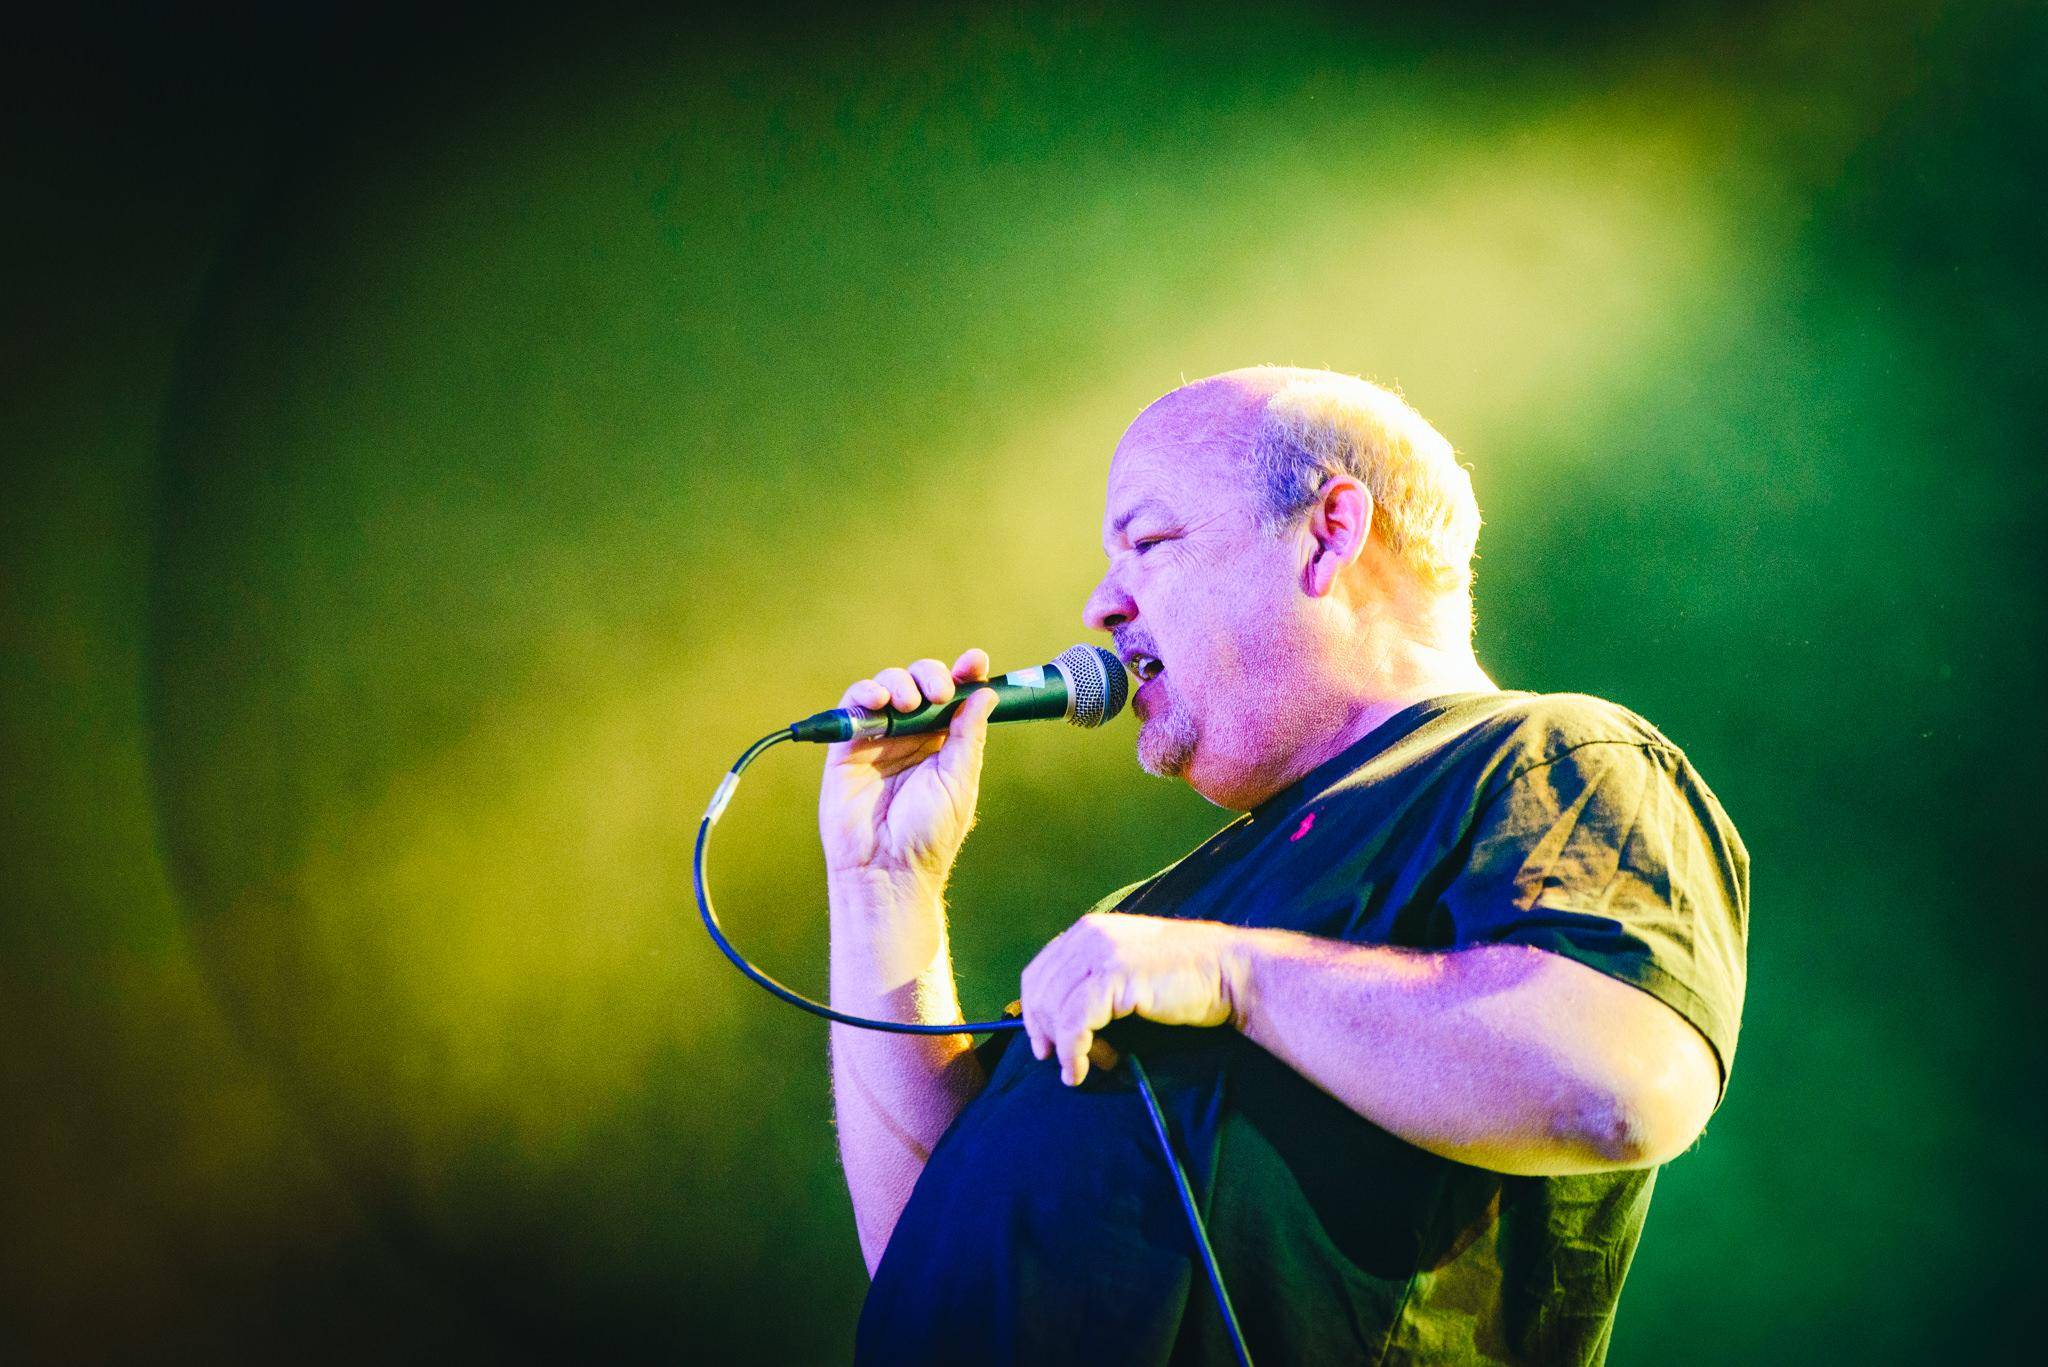 The Kyle Gass Band